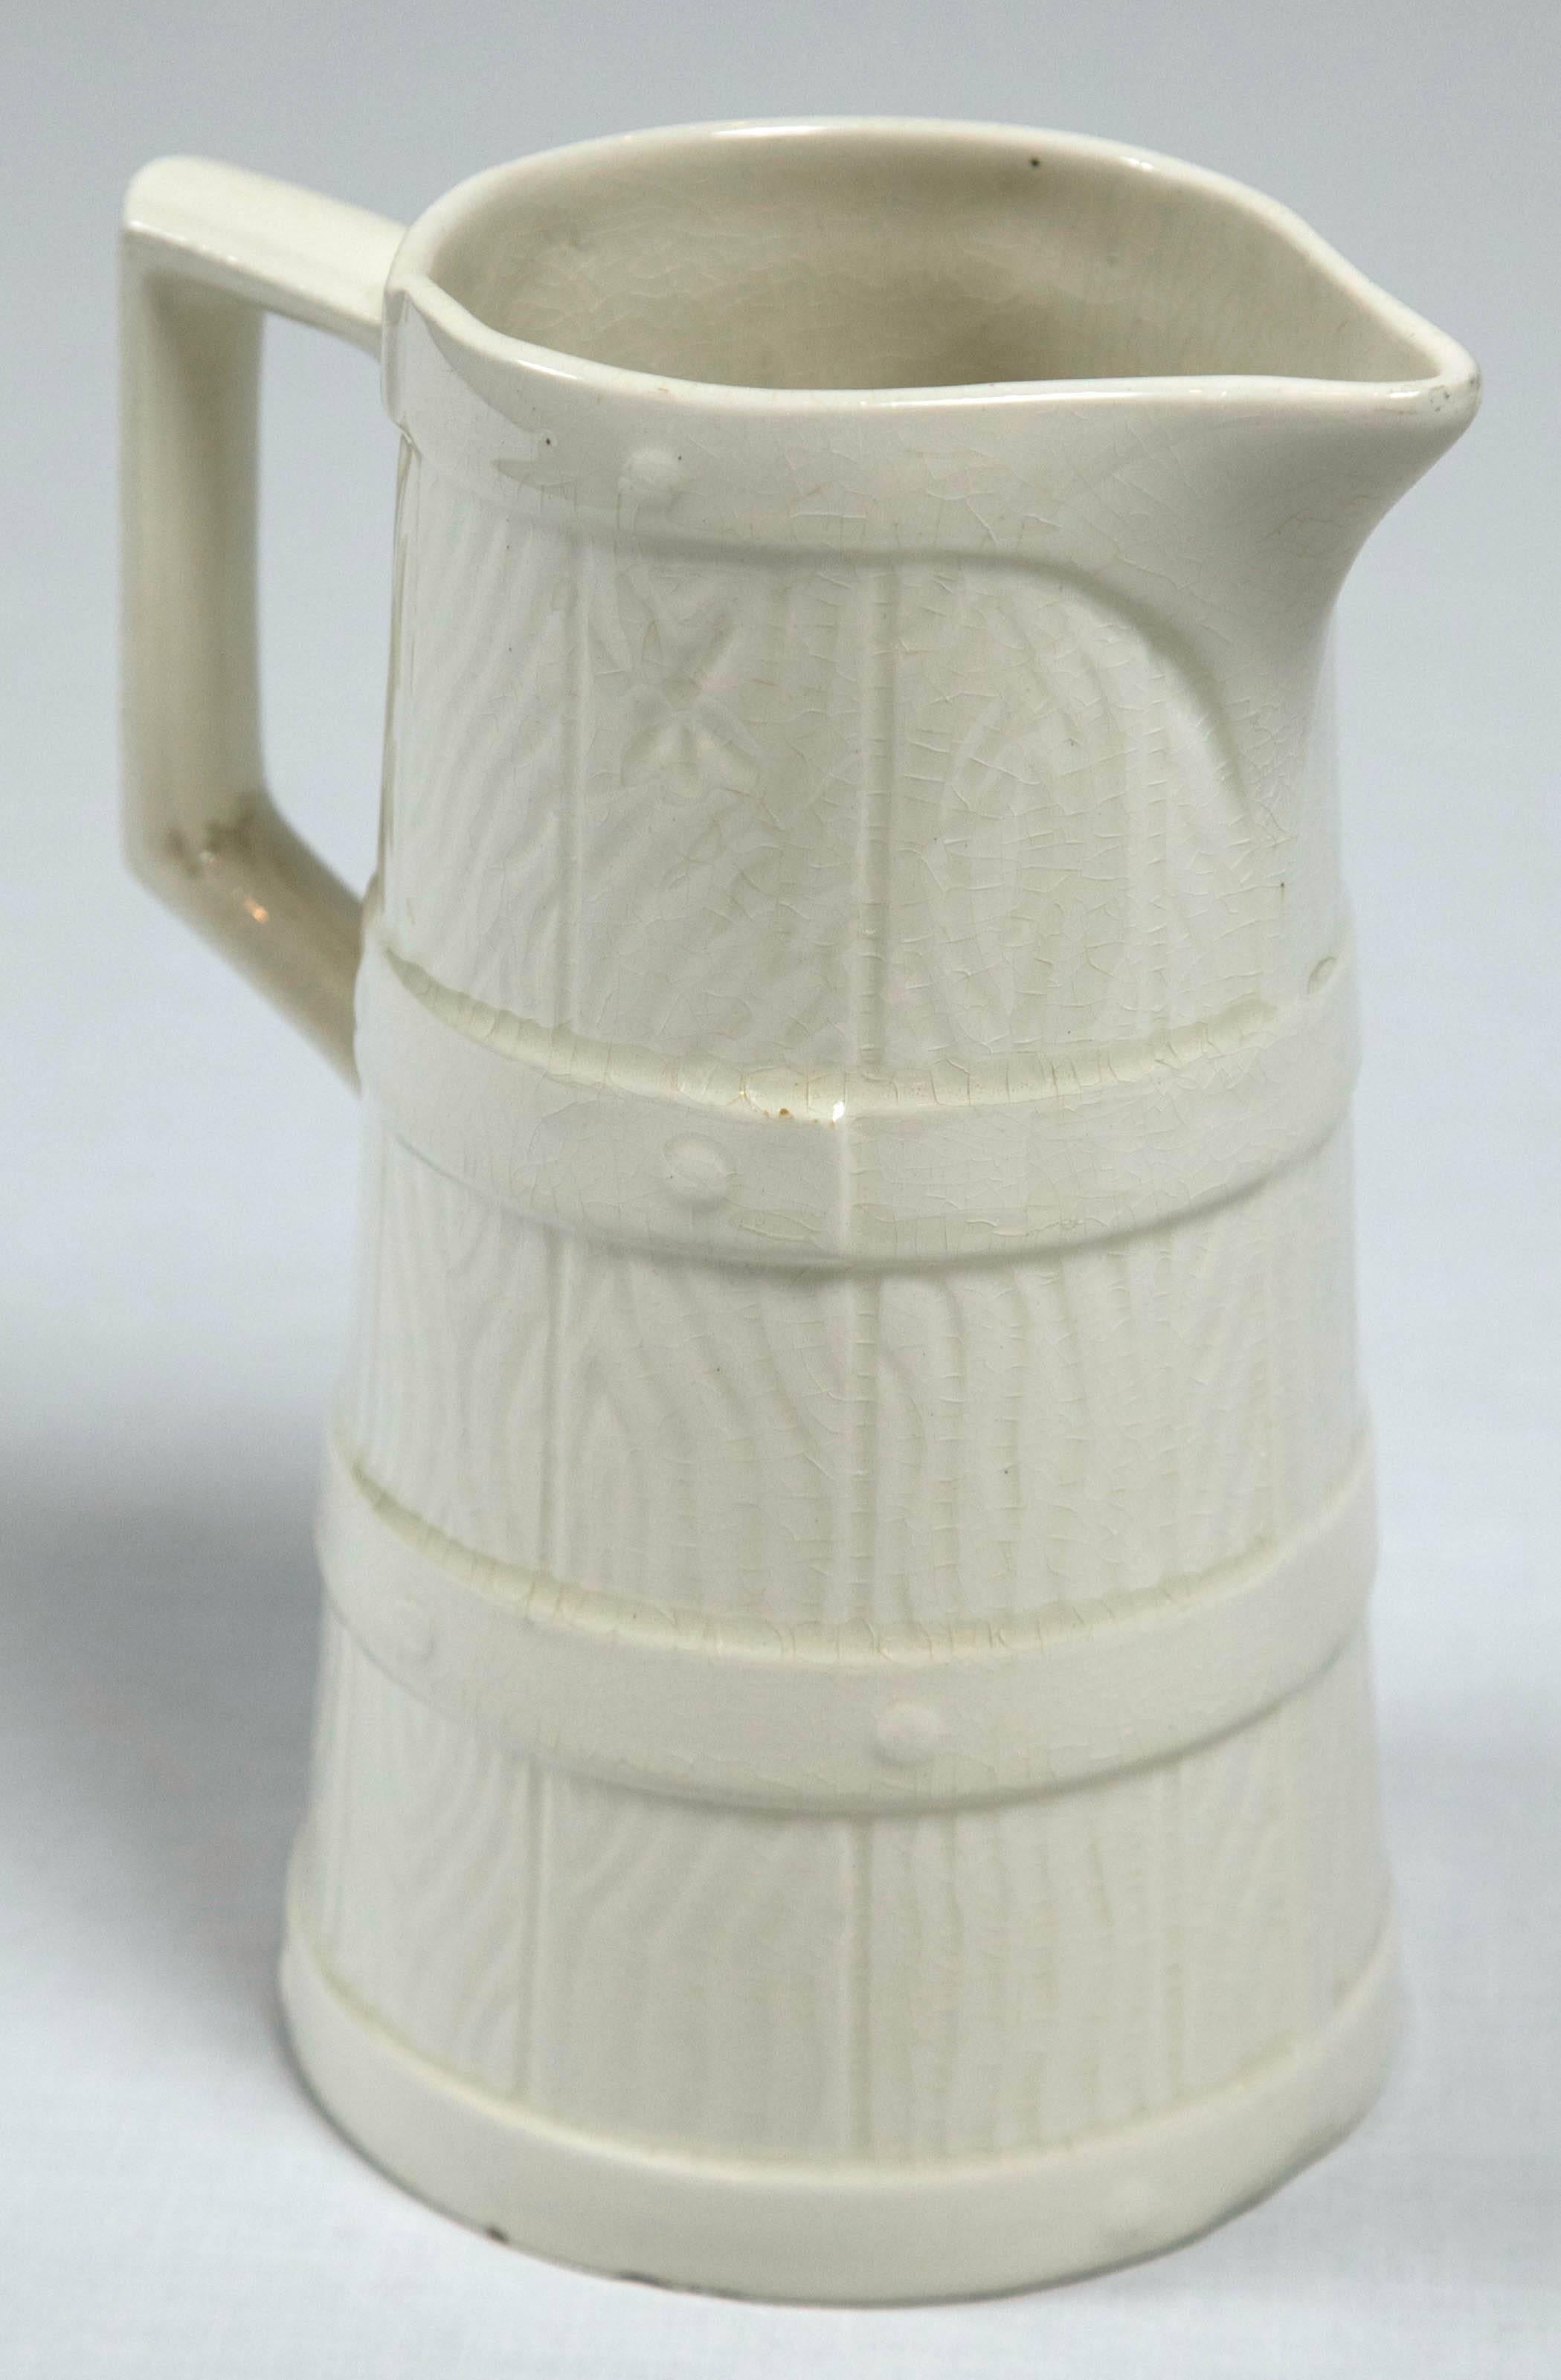 Luneville pottery pitcher, circa 1900, France. Designed as a faux bois (wood) jug with banded detail. Luneville is a French faience factory originally established in 1730.